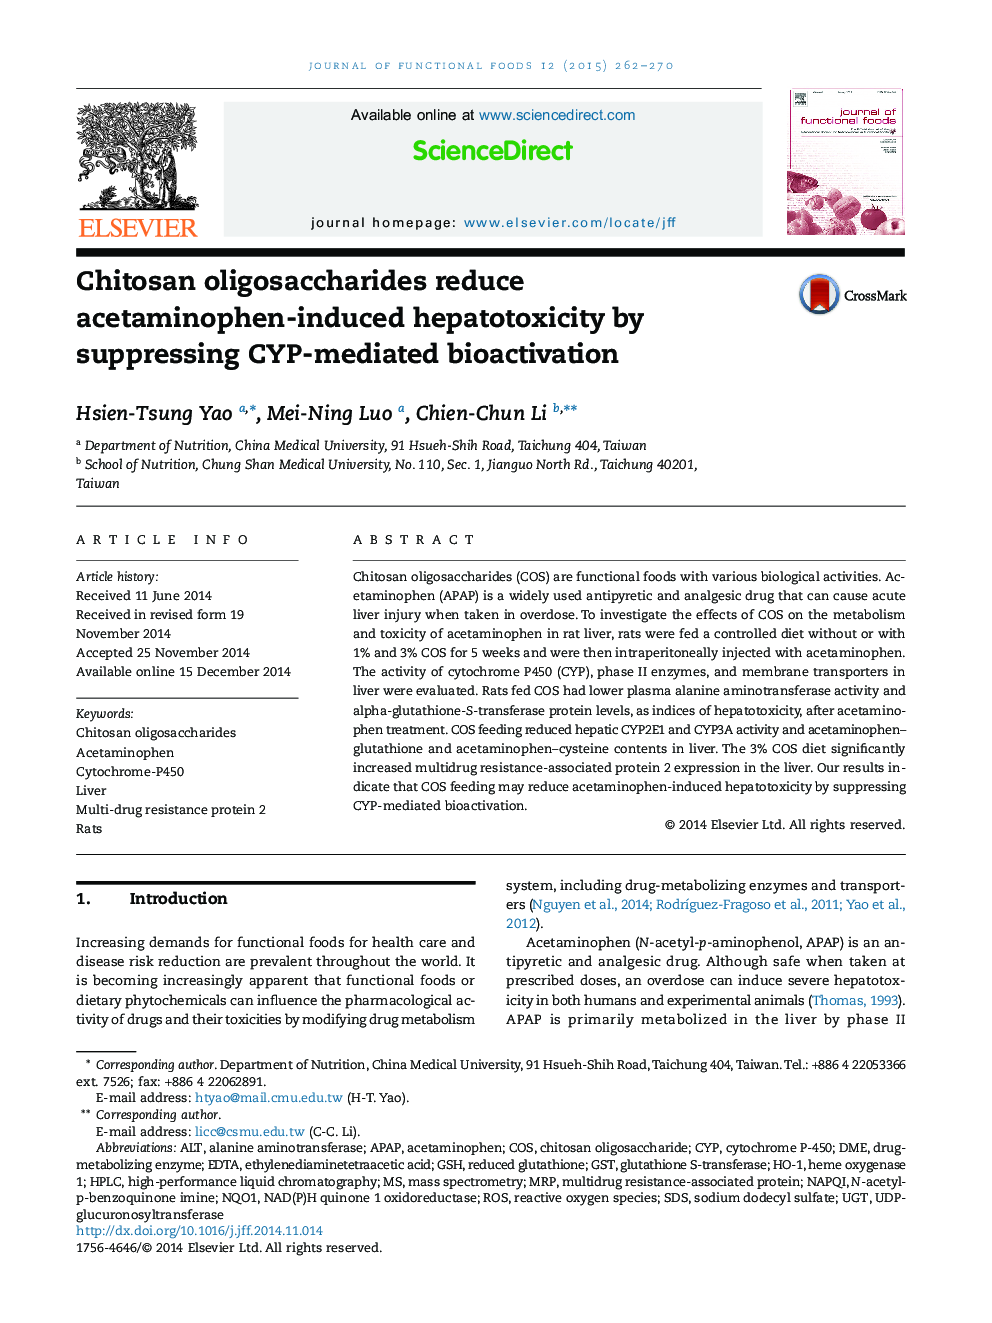 Chitosan oligosaccharides reduce acetaminophen-induced hepatotoxicity by suppressing CYP-mediated bioactivation